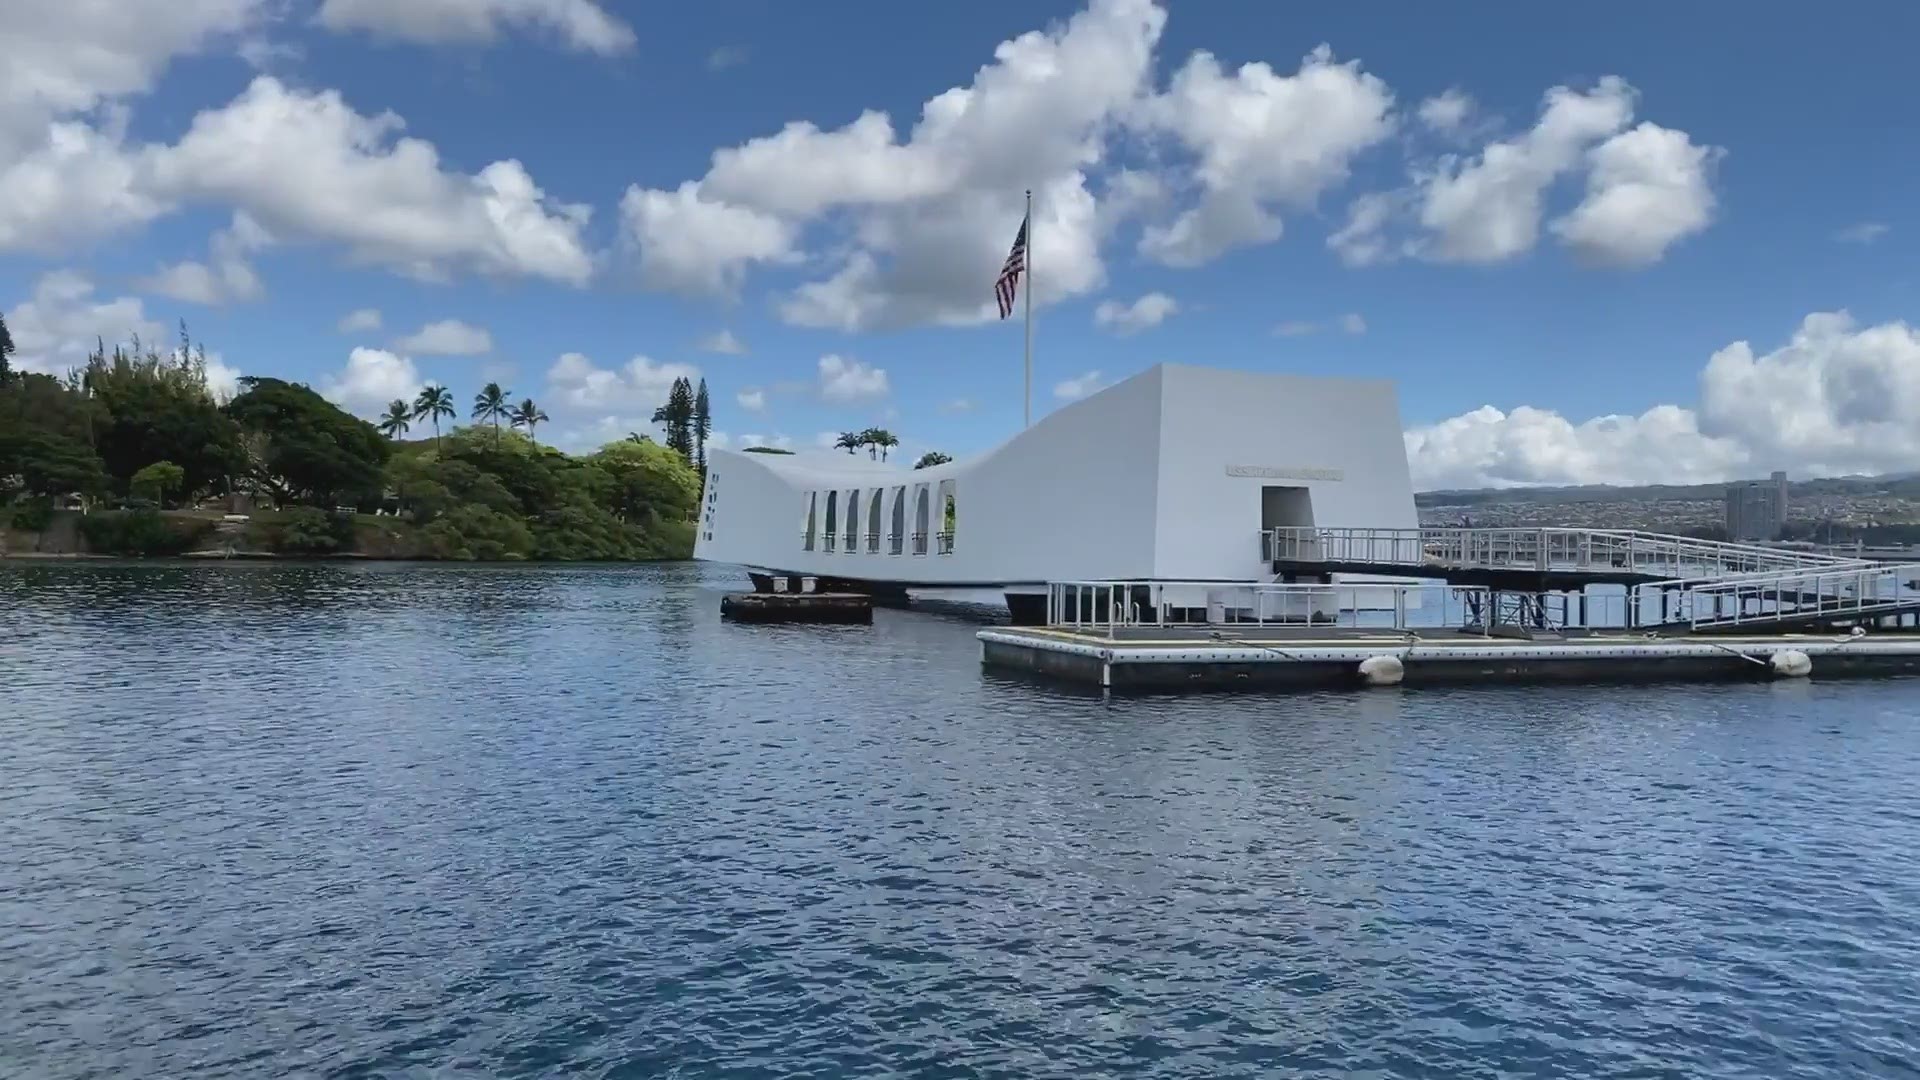 A Memorial Day video tribute to the fallen service members of Joint Base Pearl Harbor-Hickam and across the U.S.